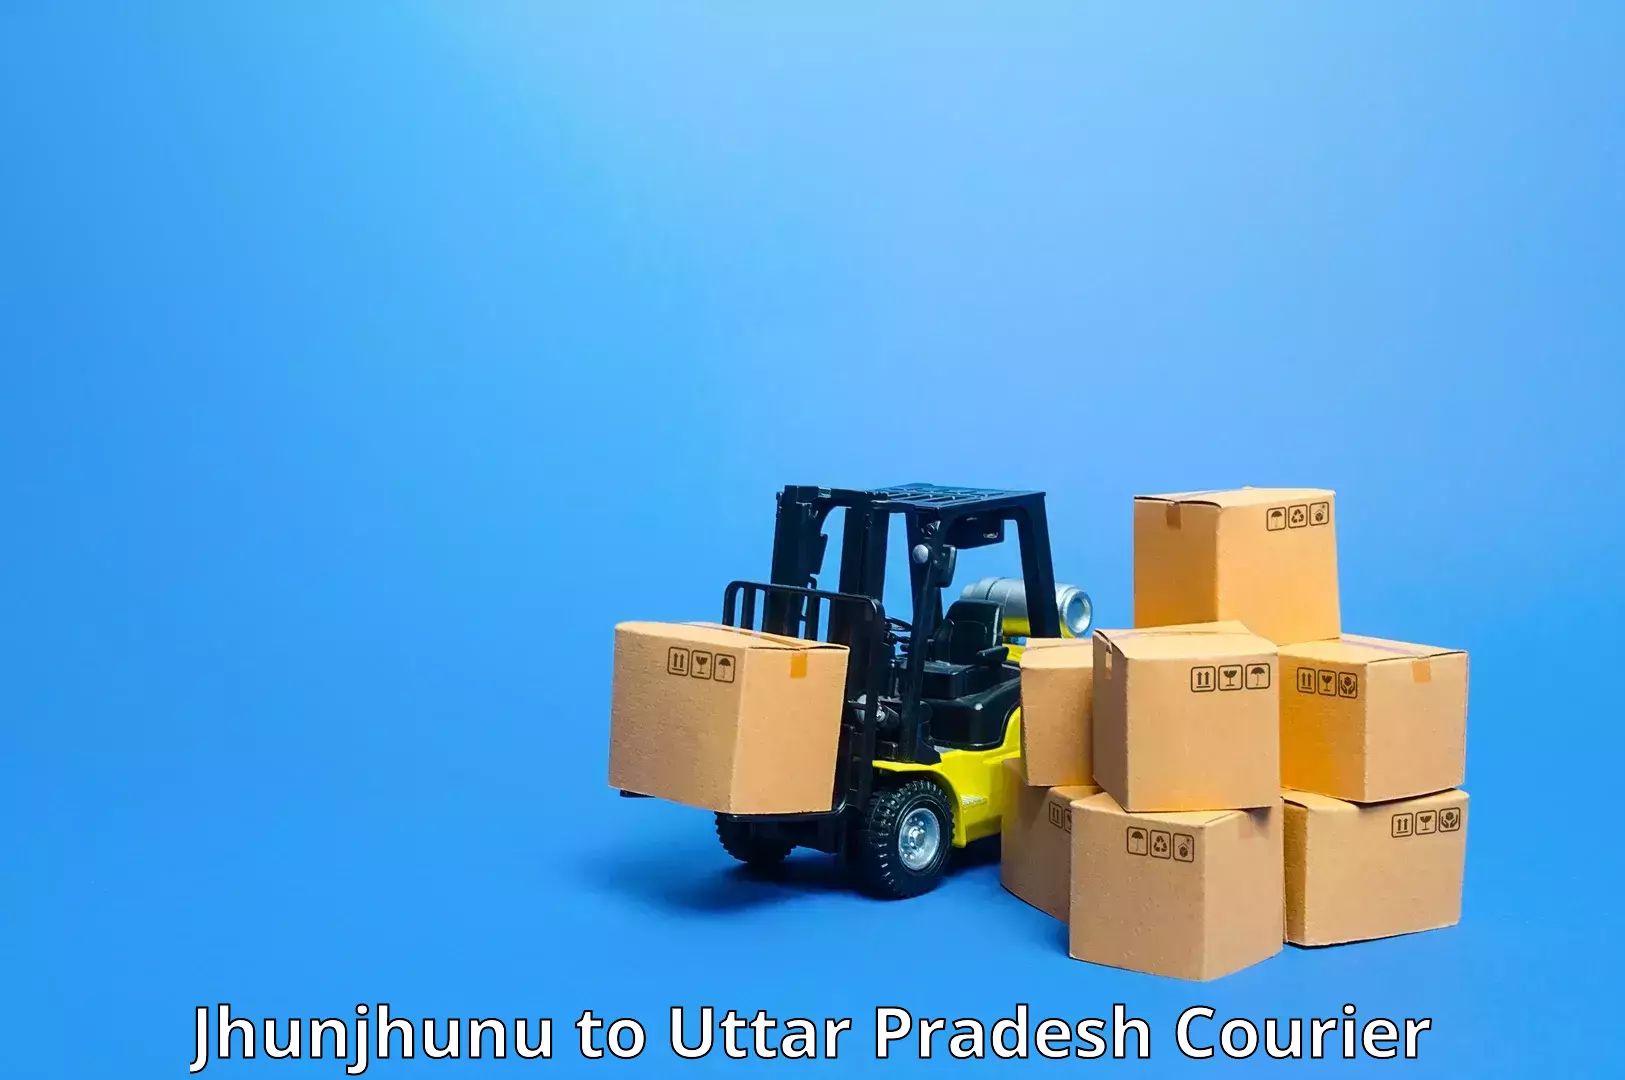 Flexible delivery scheduling Jhunjhunu to Dhaurahara